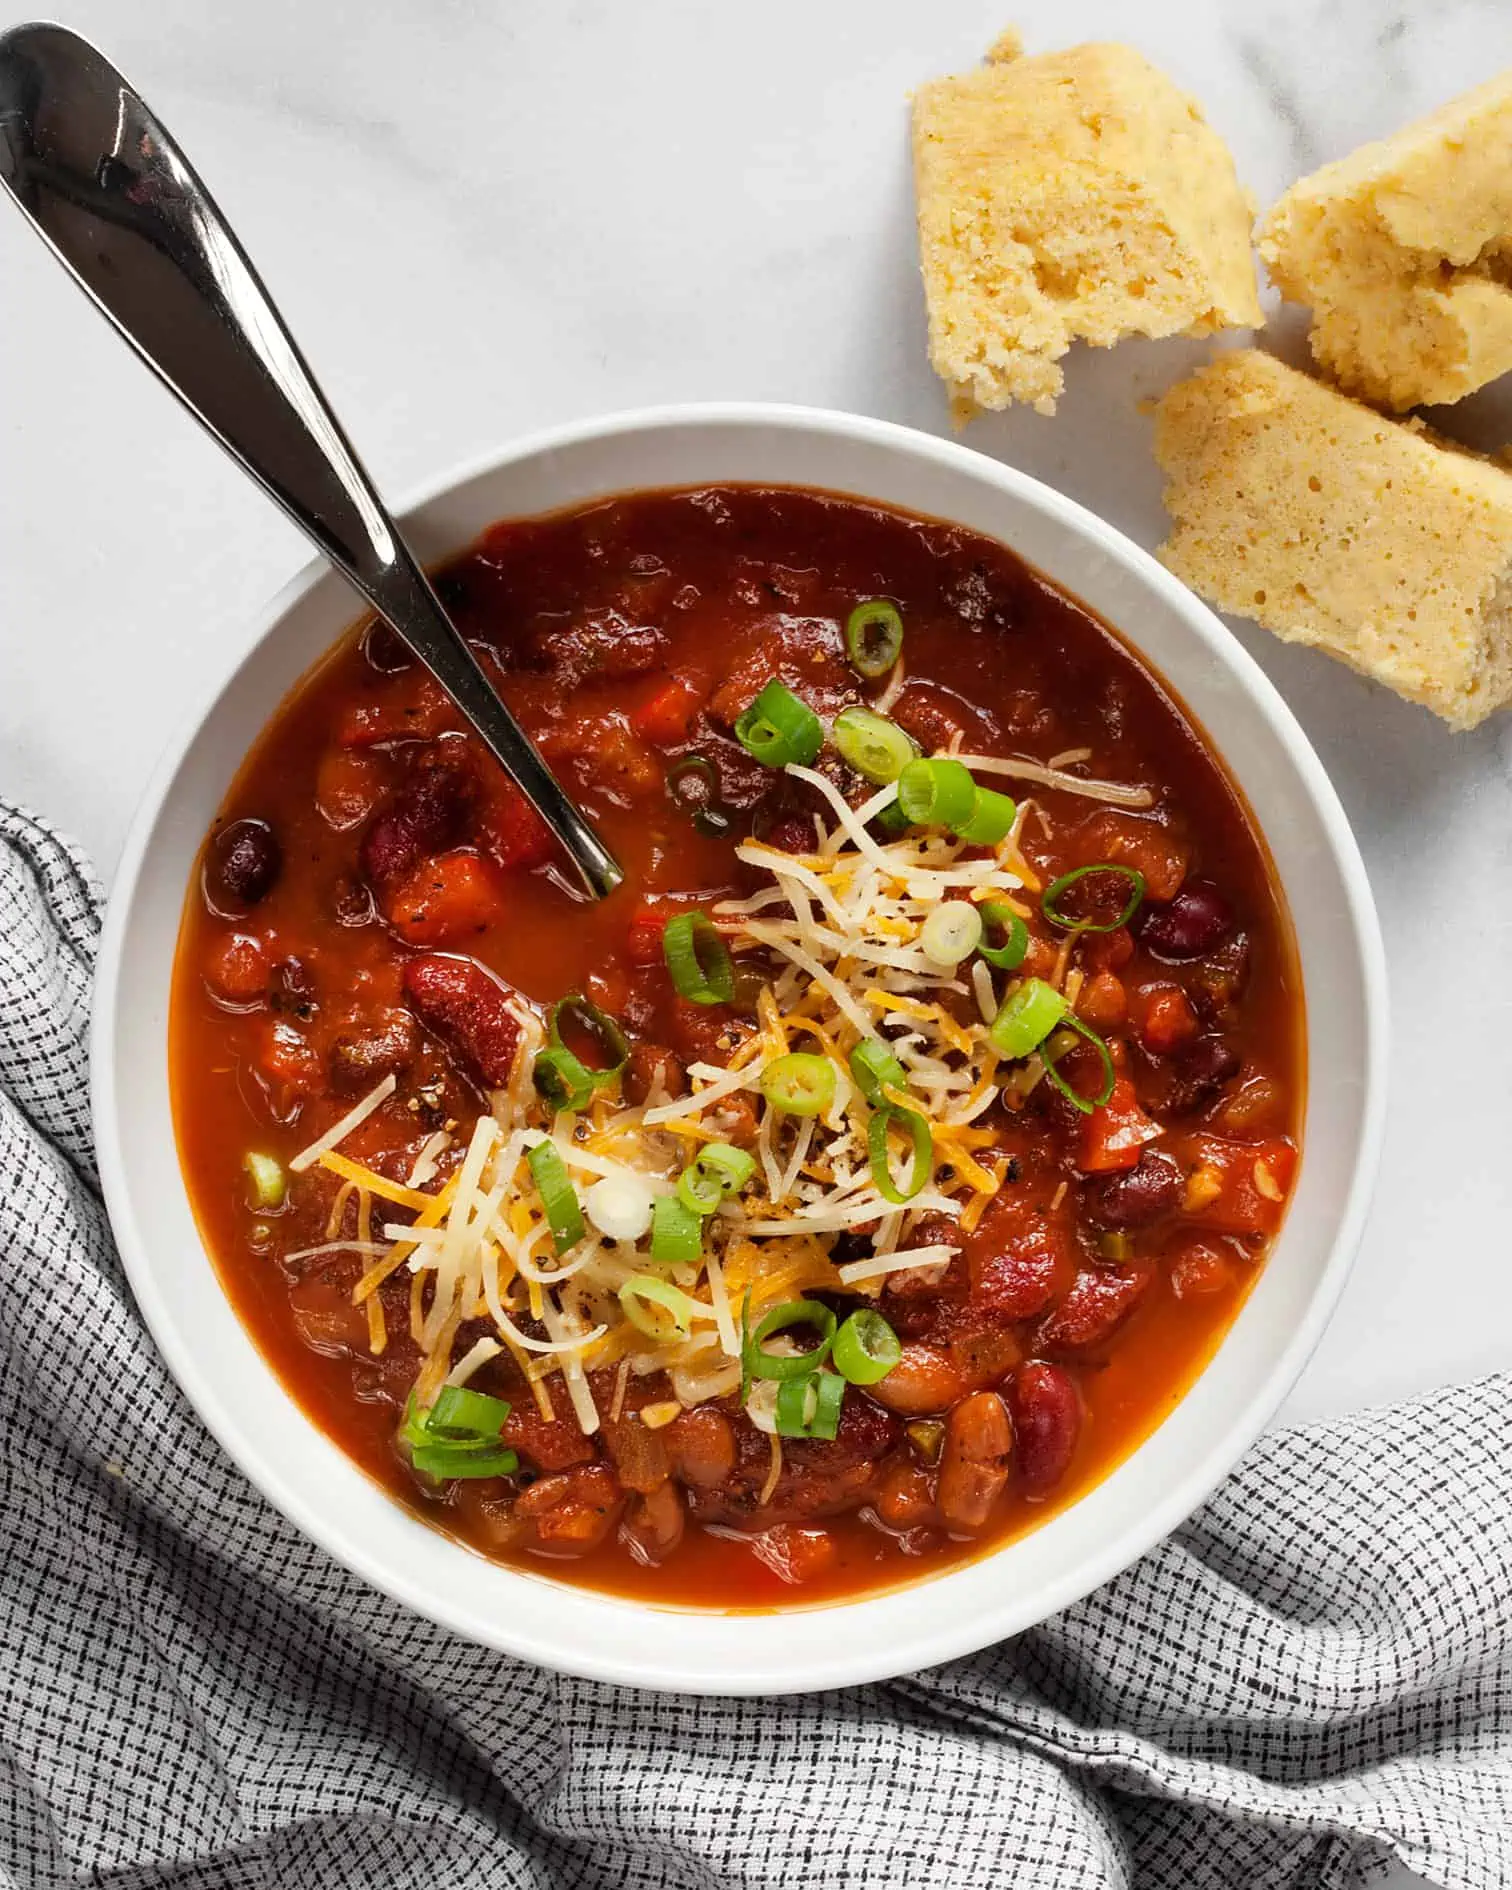 Three bean chili in a bowl with a side of cornbread